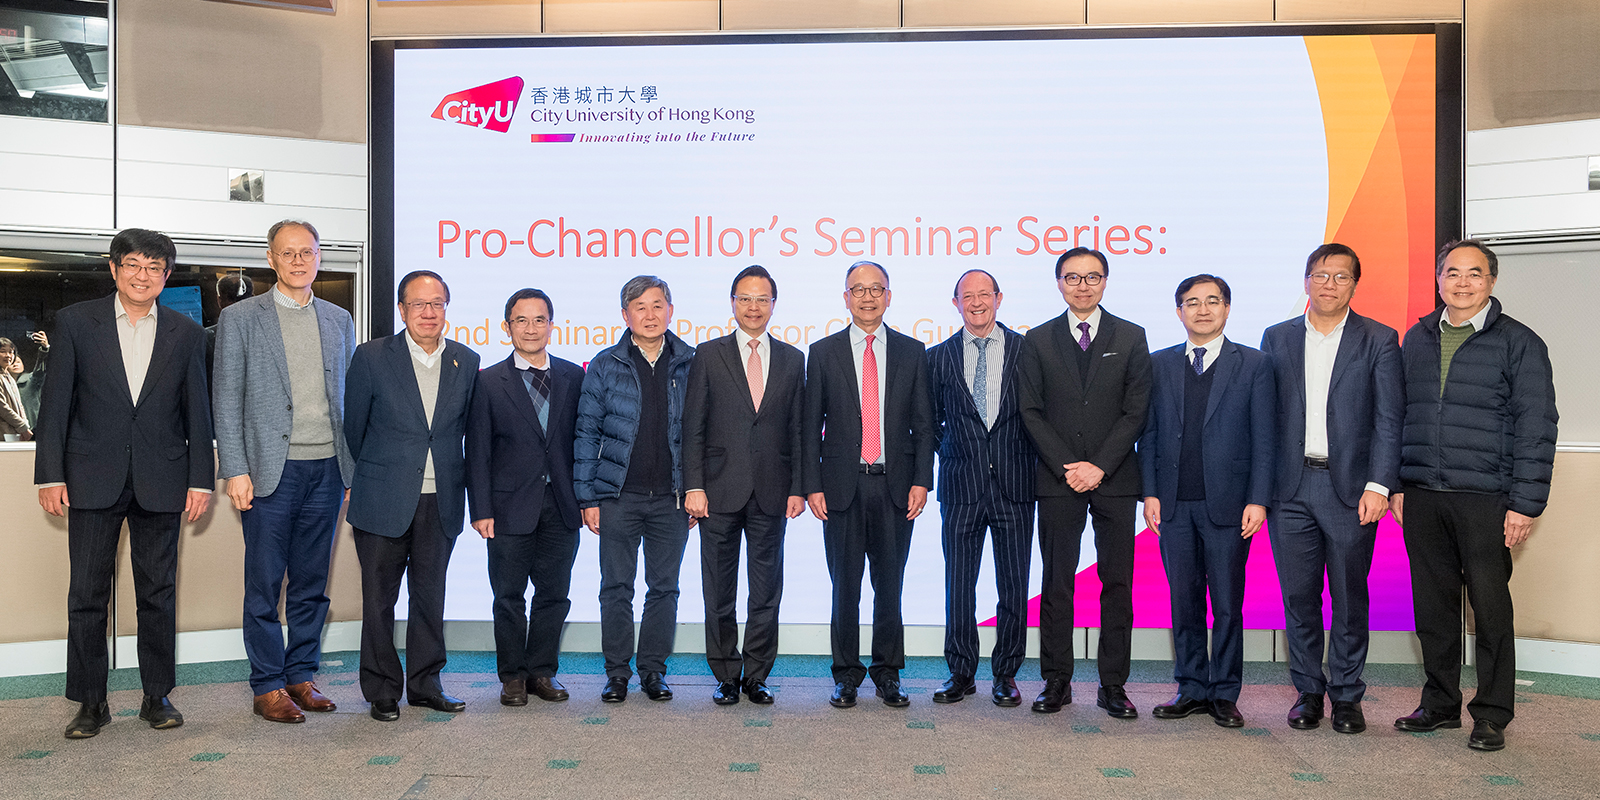 Dr Chung Shui-ming (6th from right) and Professor Chen Guohua (3rd from right) took a photo with guests.